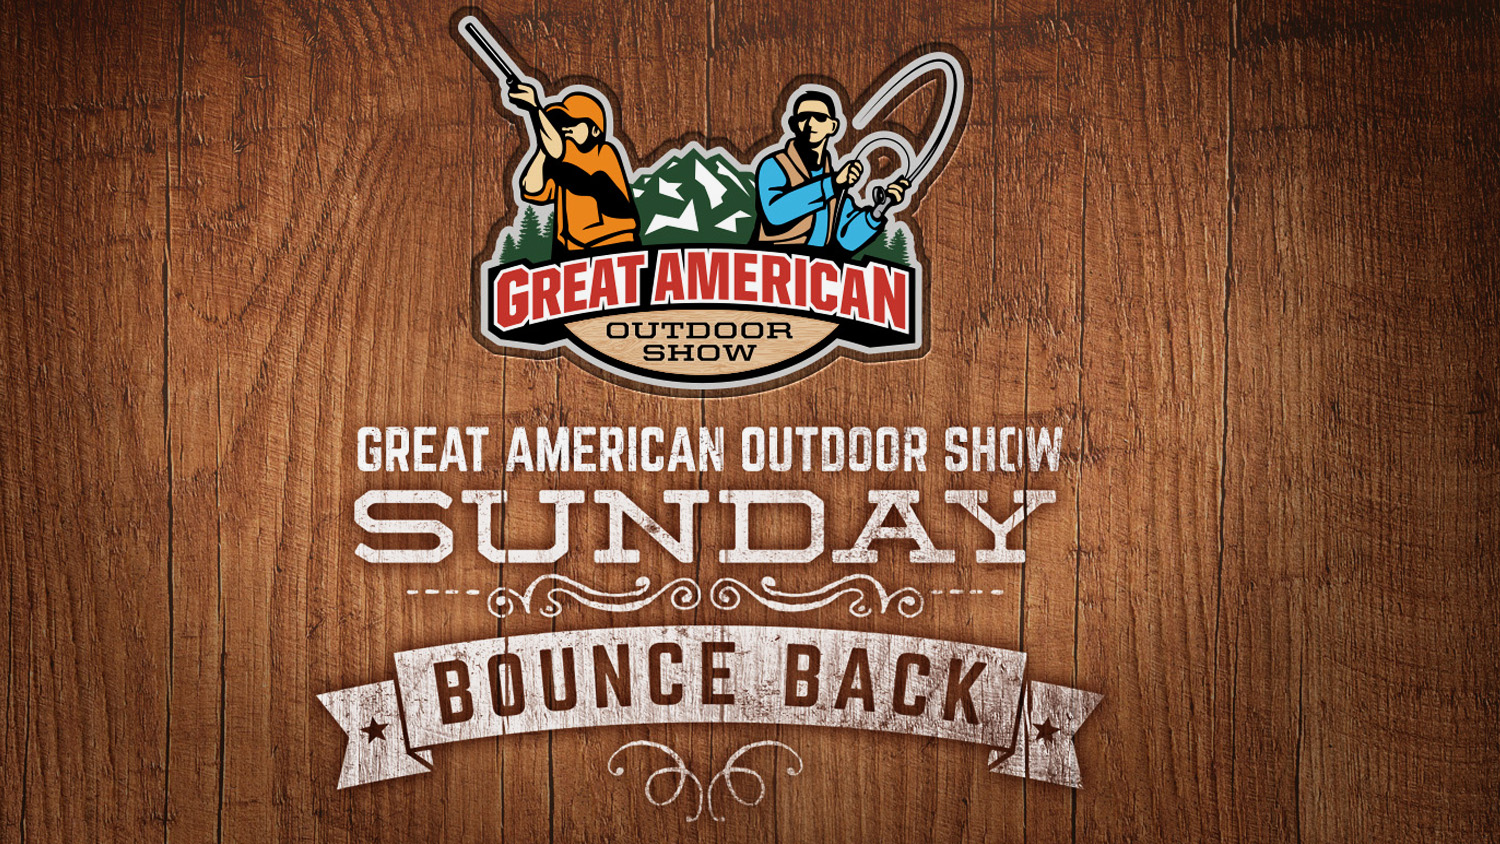 Bounce Back Sunday at the Great American Outdoor Show